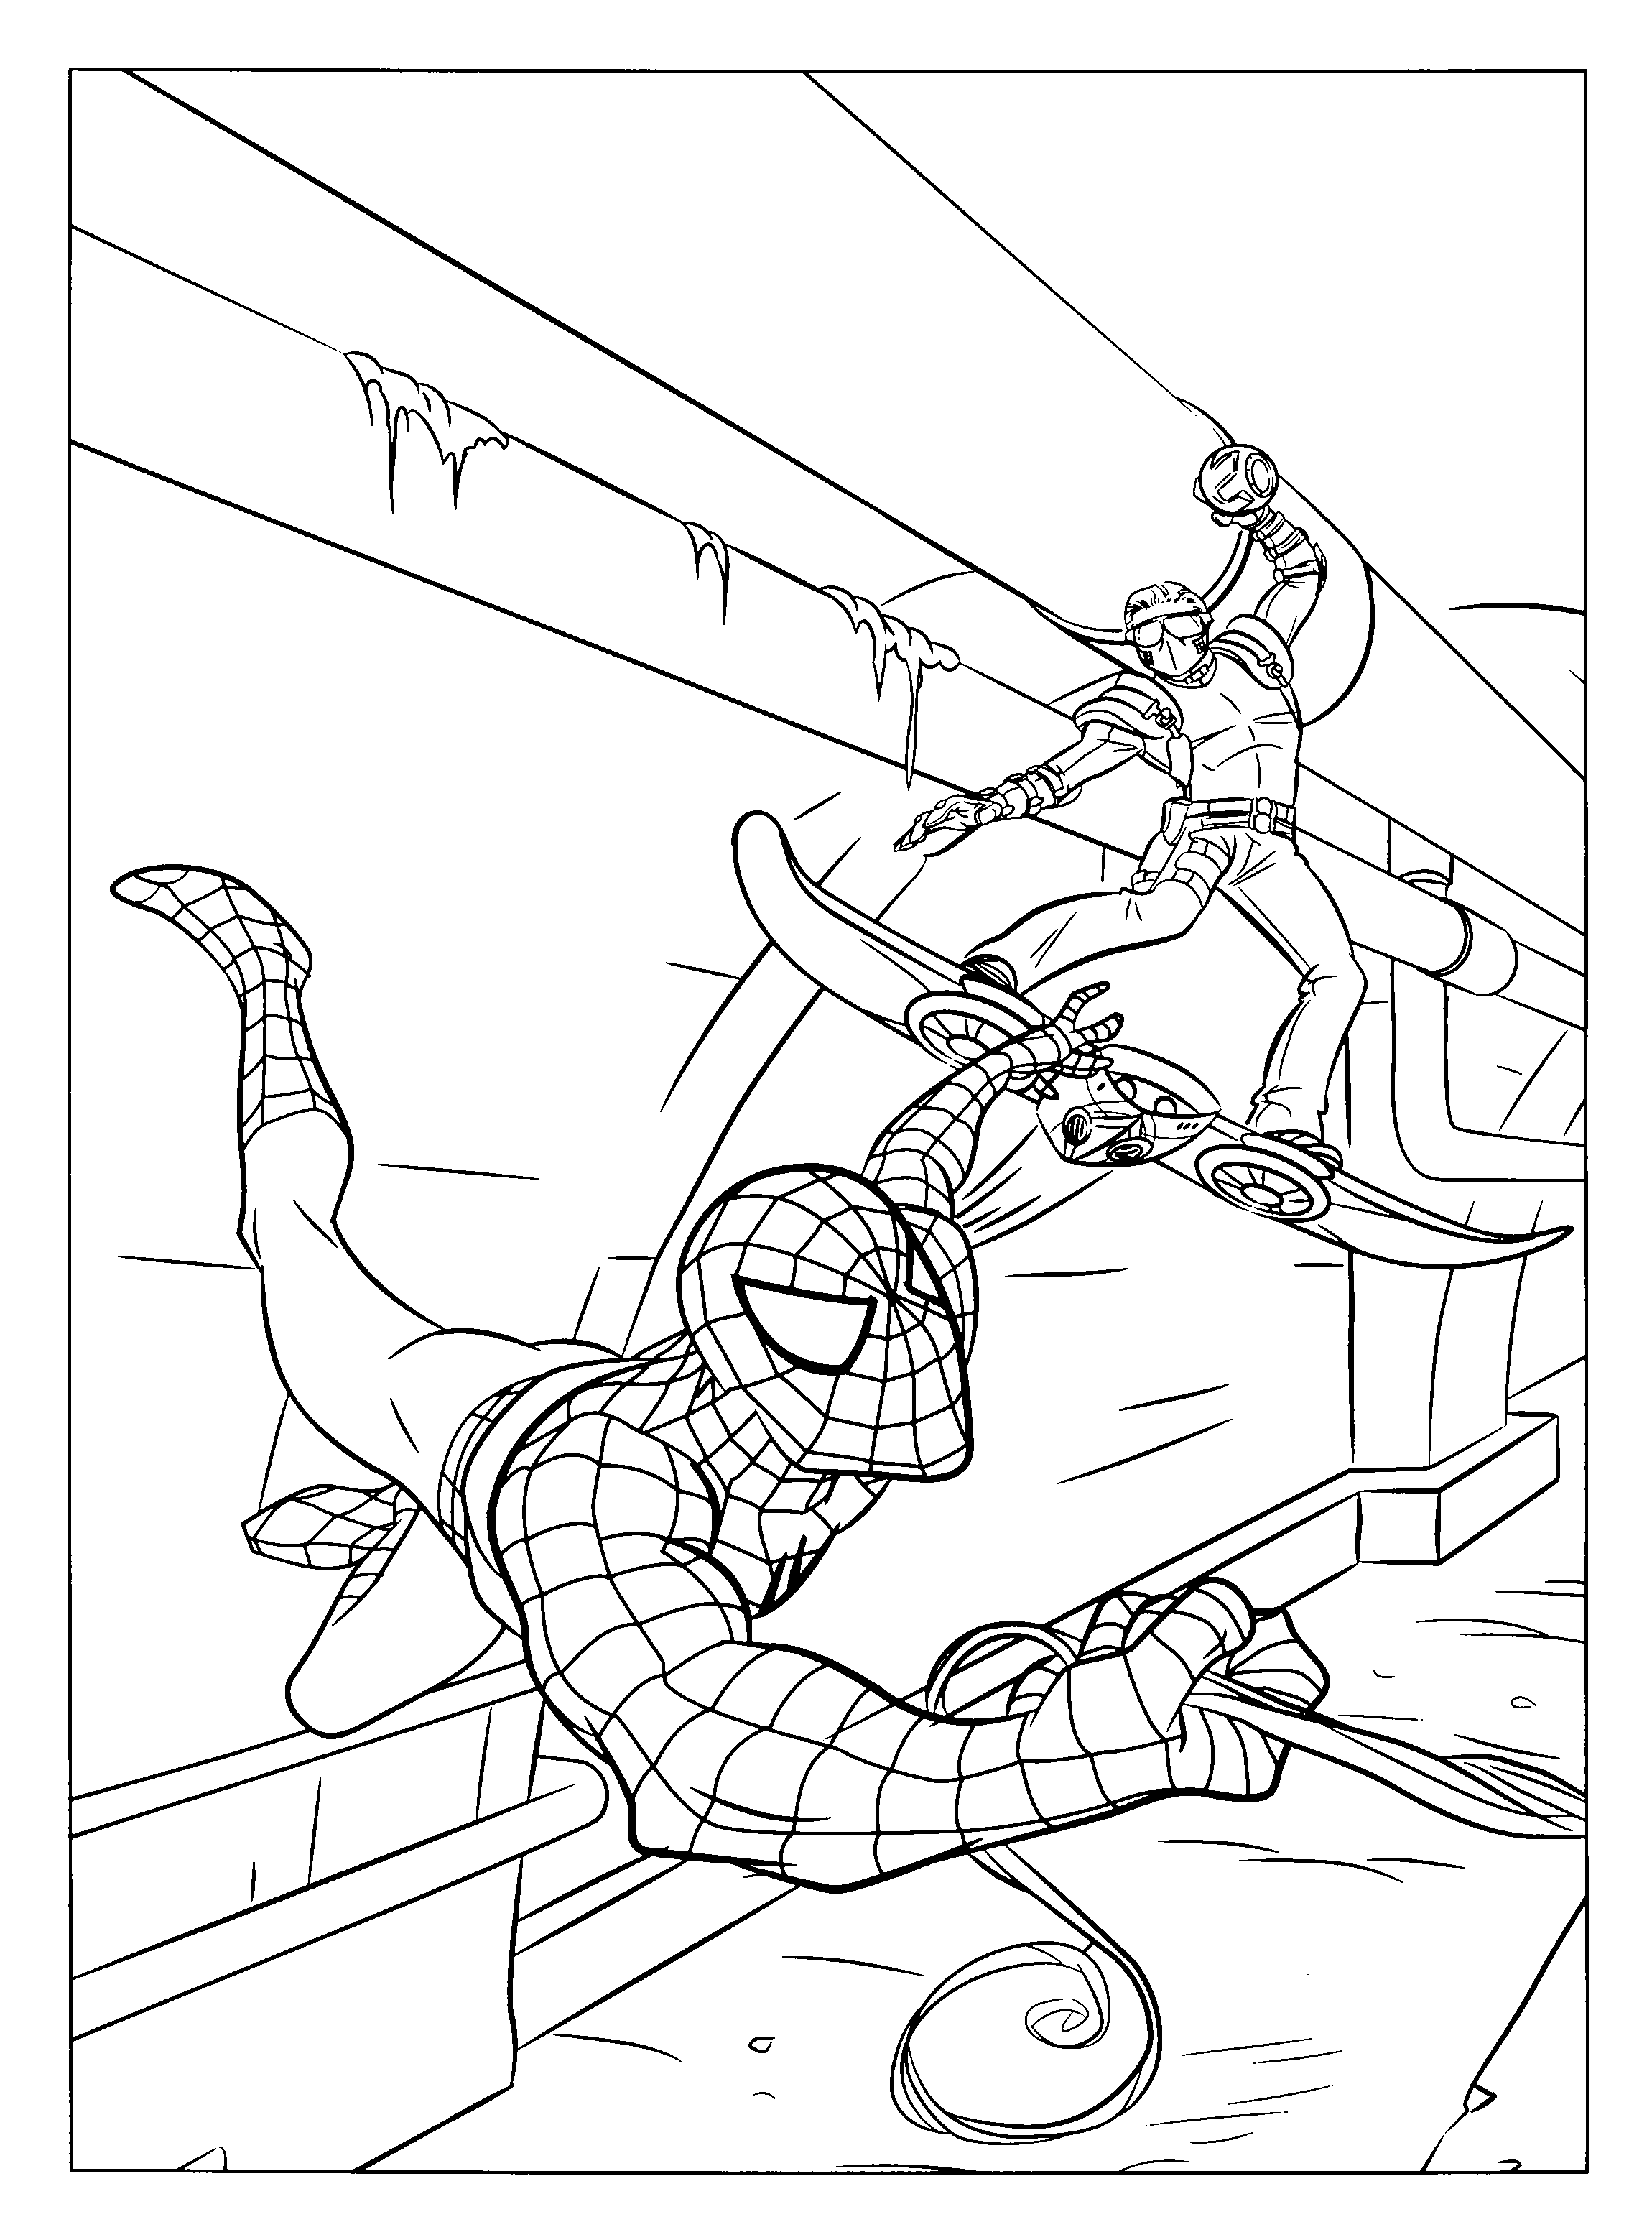 Spiderman Coloring pages | Coloring page | FREE Coloring pages for kids | #6